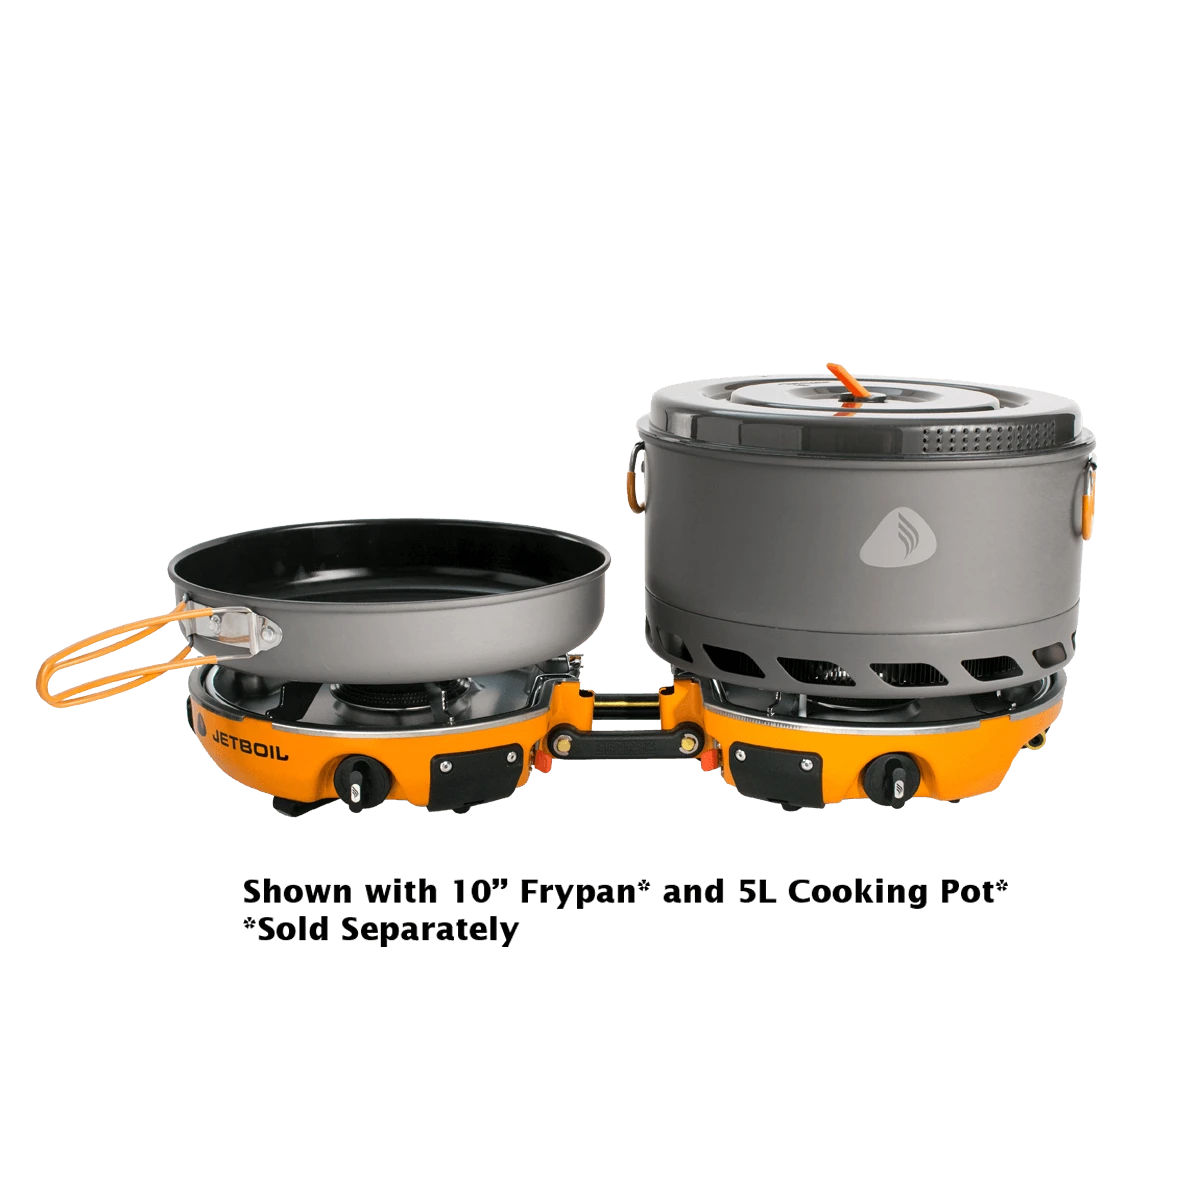 Shown with 10" frypan and 5L cooking pot (both sold separately)